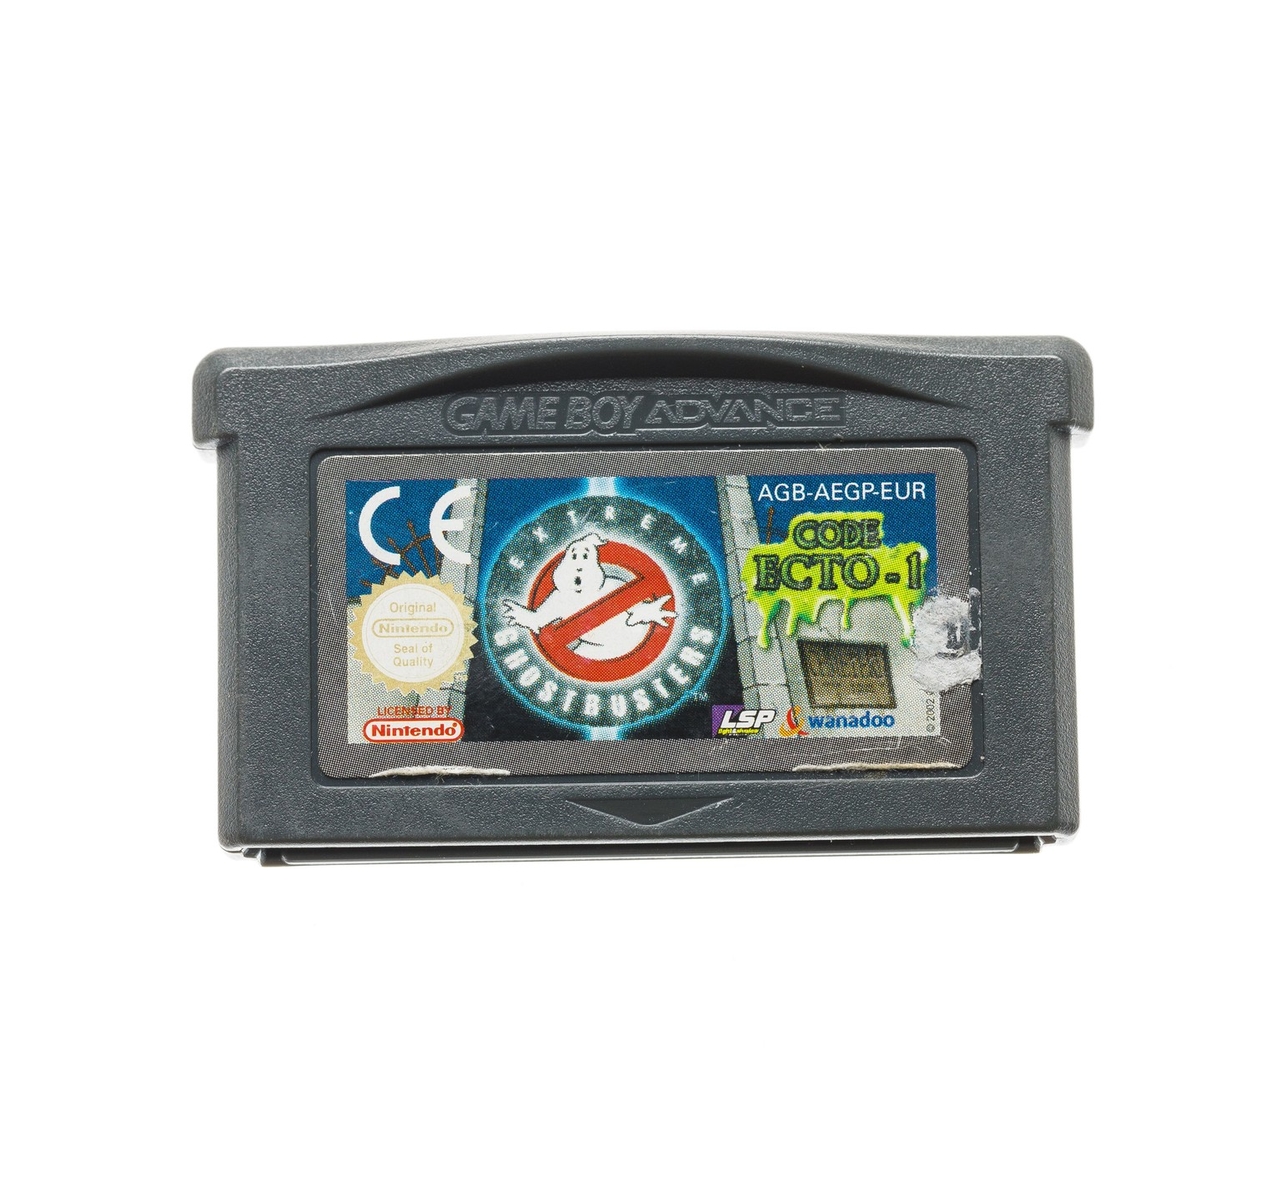 Extreme Ghostbusters: Code Ecto-1 - Gameboy Advance Games